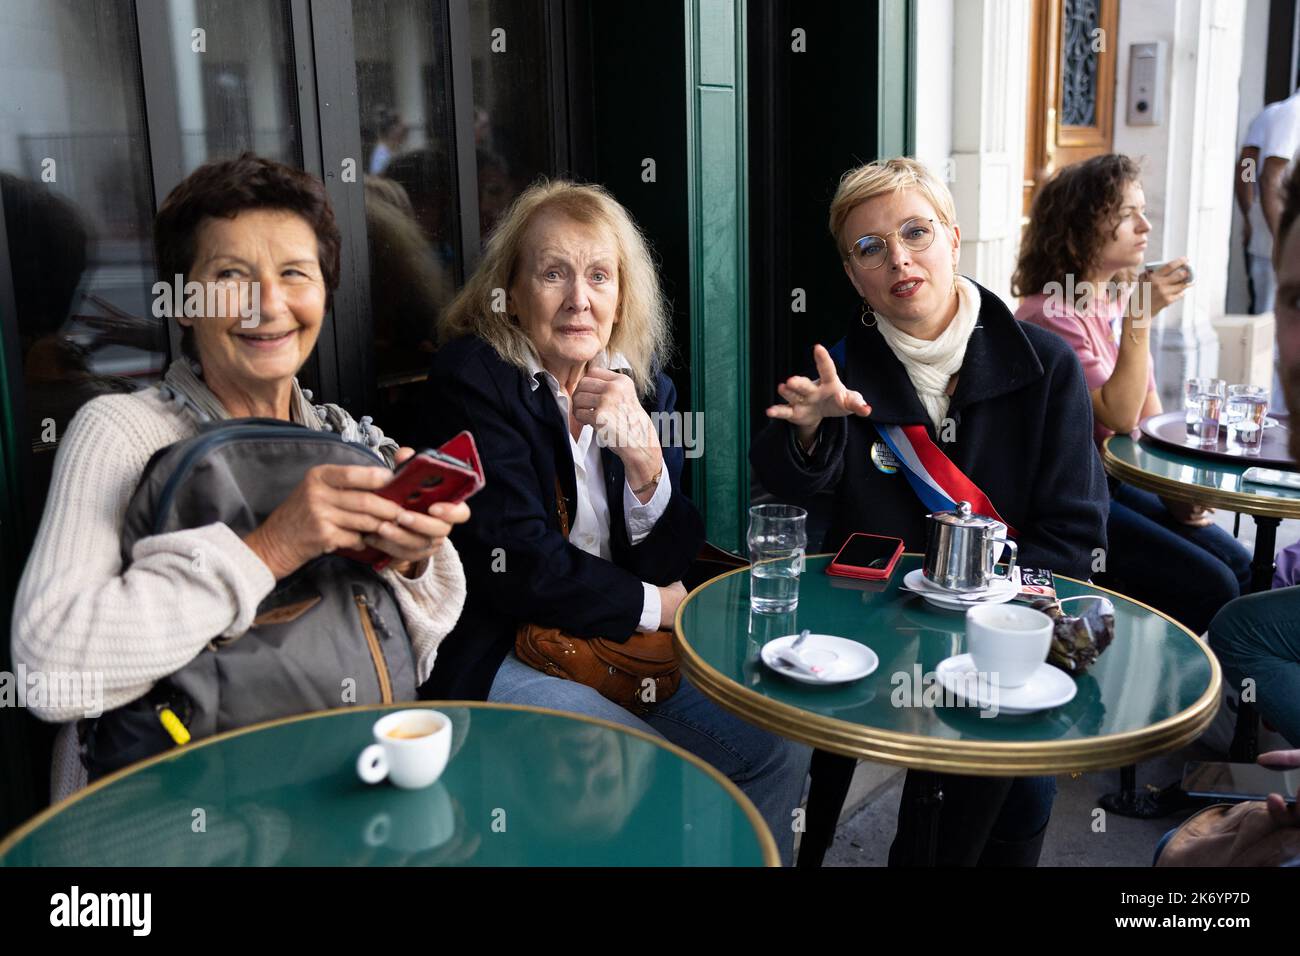 2022 Nobel Literature Prize laureate French novelist Annie Ernaux and LFI deputy Clementine Autain at the terrasse of a cafe during a rally against soaring living costs and climate inaction called by French left-wing coalition NUPES (New People Ecologic and Social Union) in Paris on October 16, 2022 Photo by Raphael Lafargue/ABACAPRESS.COM Stock Photo